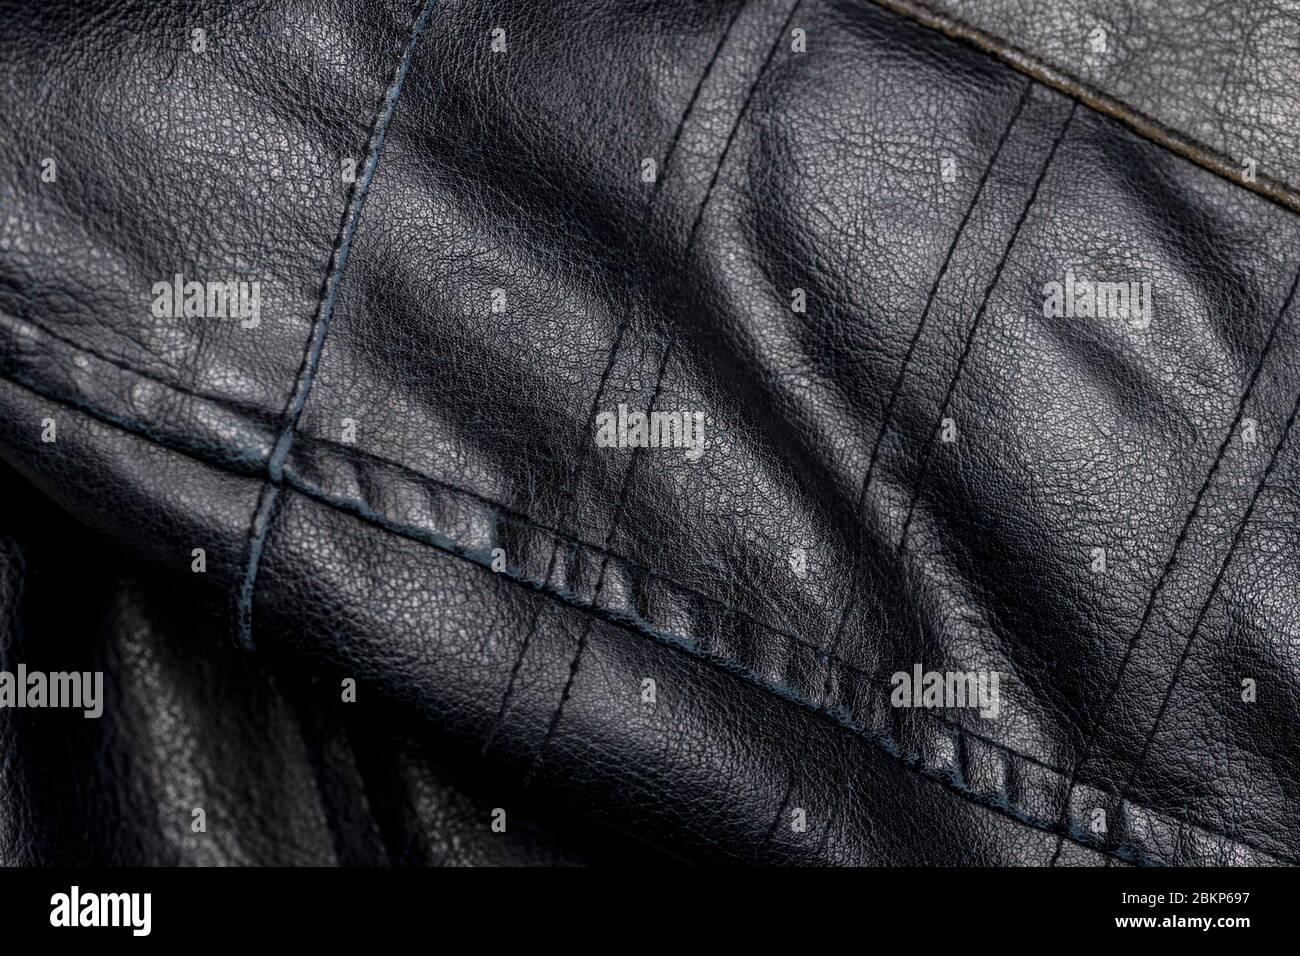 close up detail of a black leather vintage motorcycle jacket Stock Photo